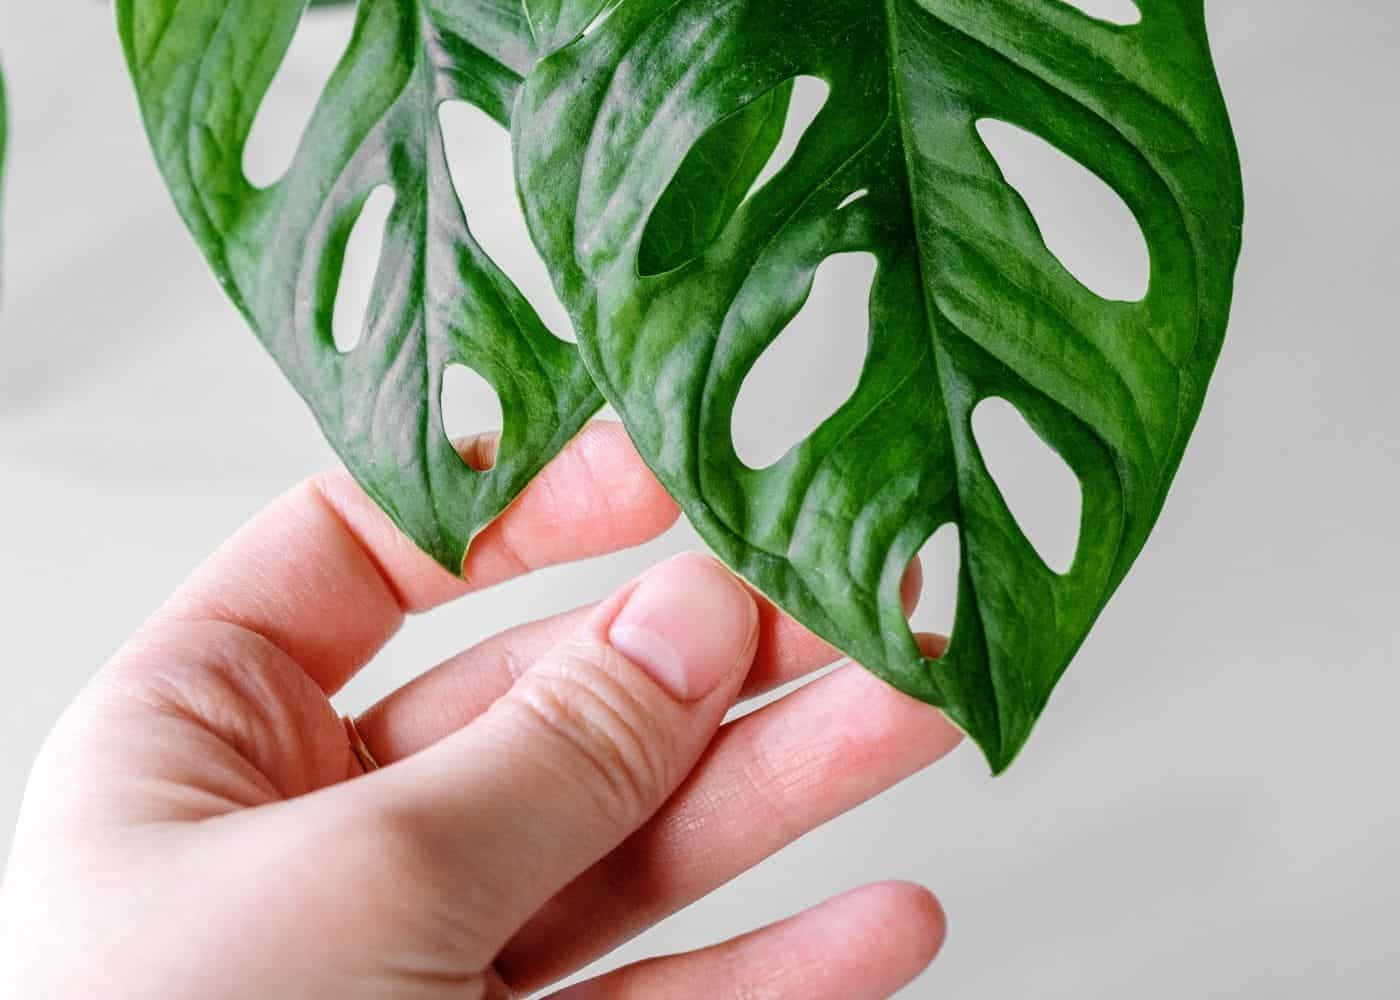 Majestic Monstera Leaves With Colorful Veins